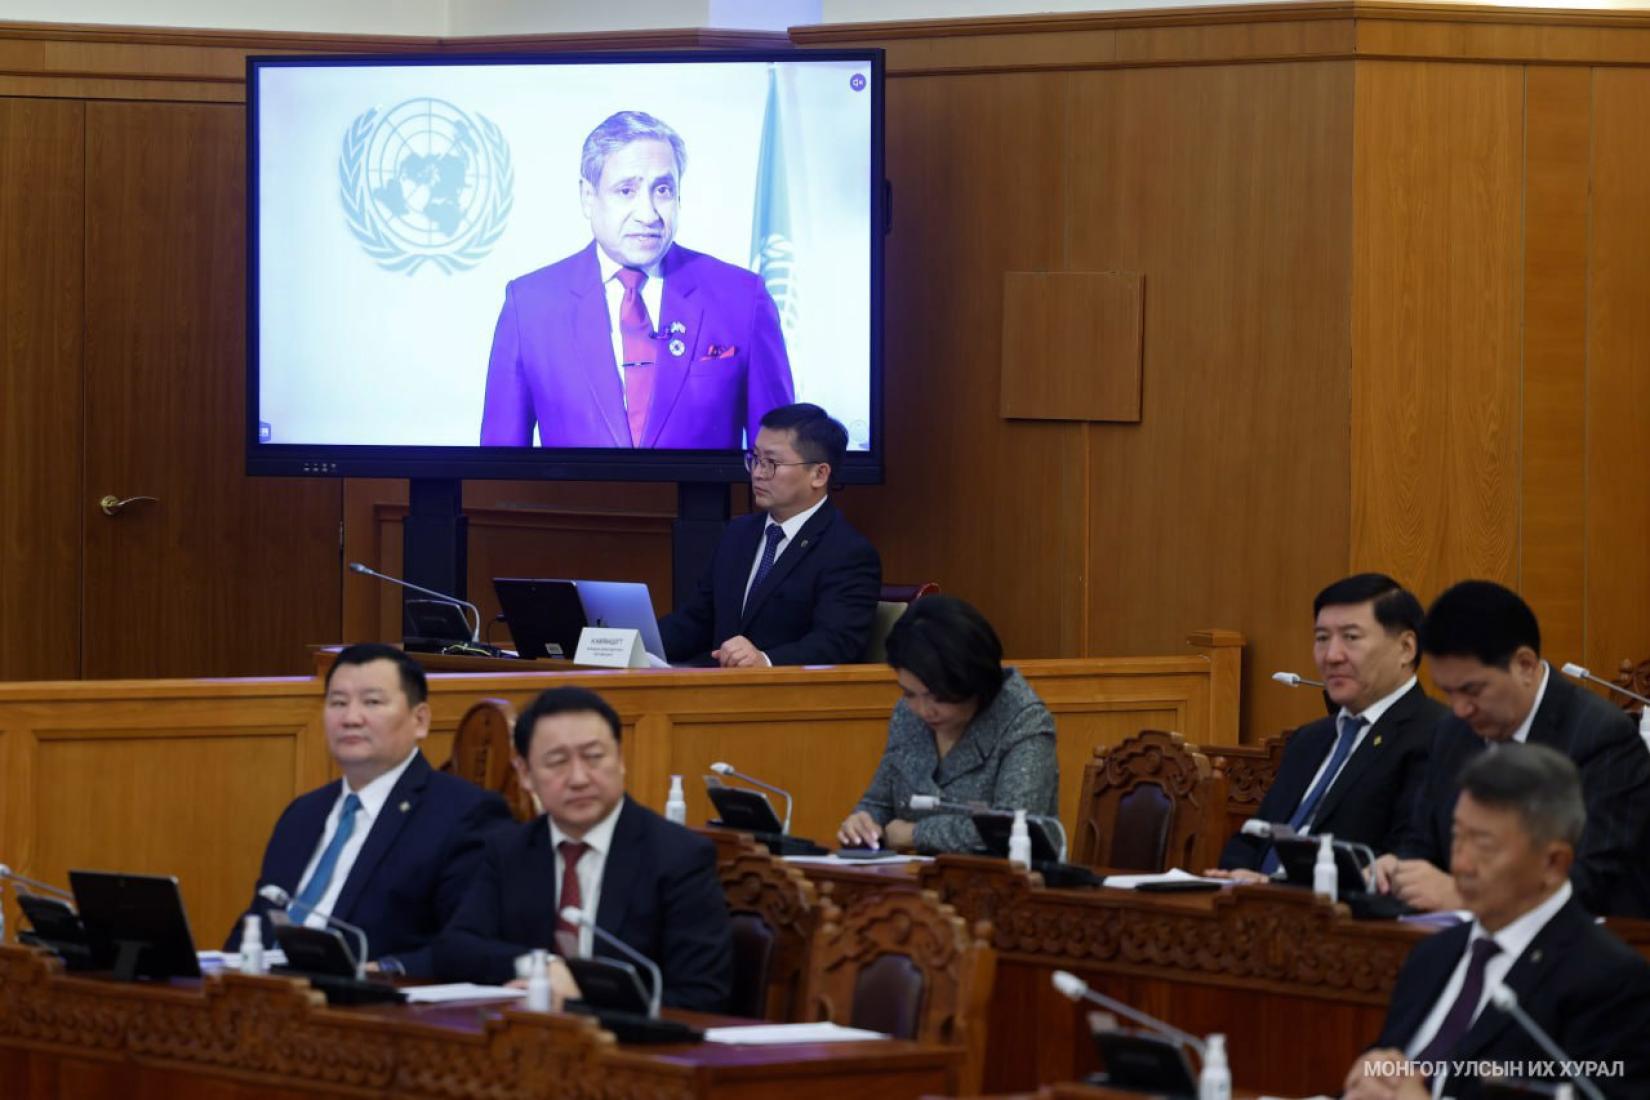 Tapan Mishra video message on Parliament of Mongolia